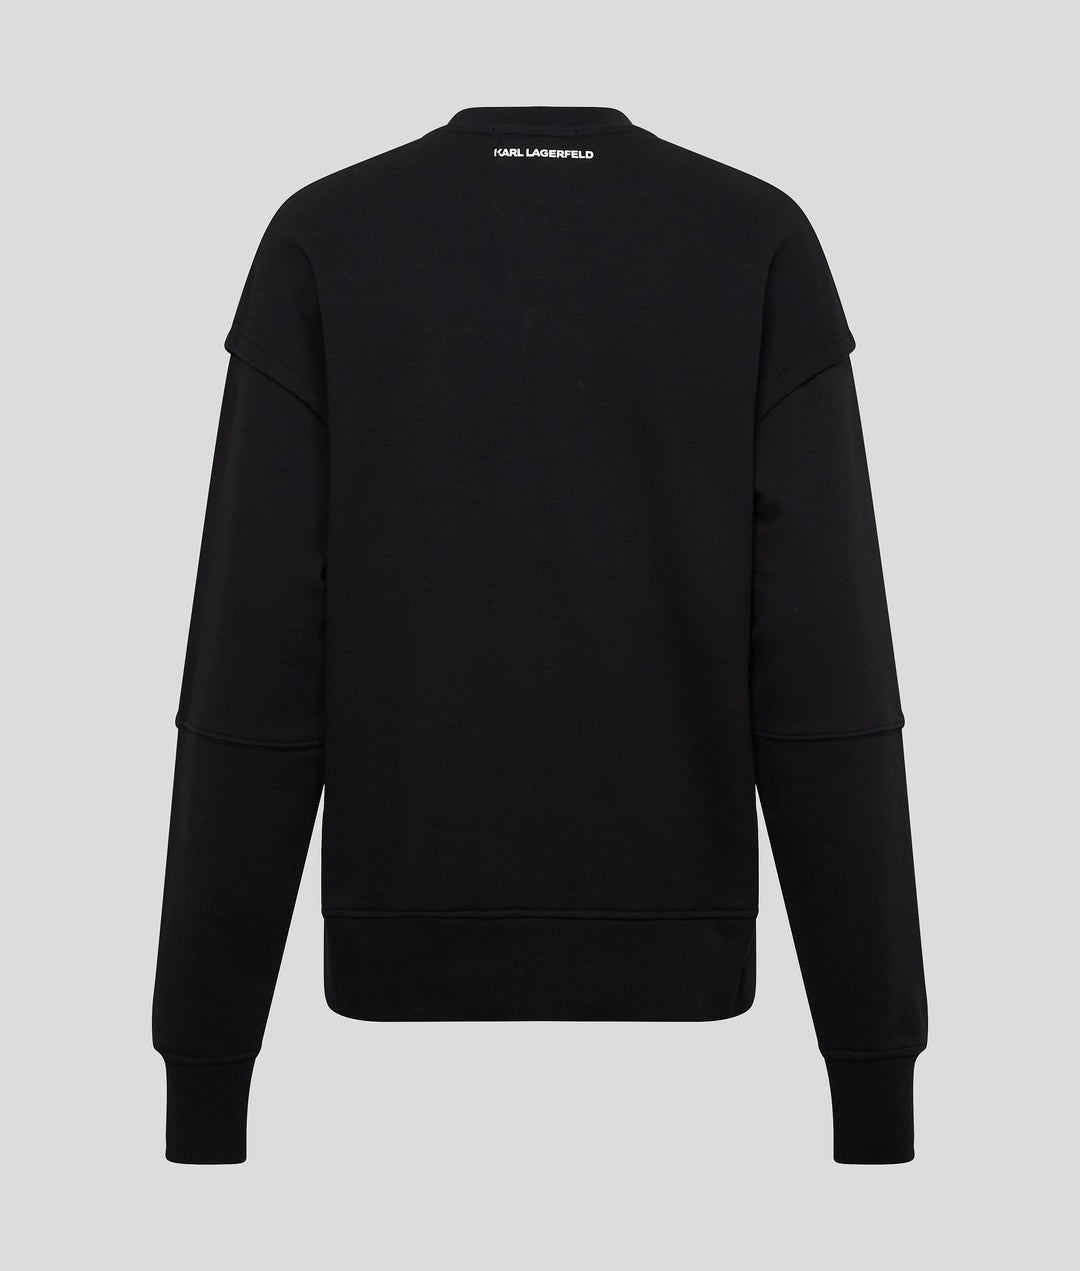 IKONIK 2.0 RELAXED FIT SWEAT